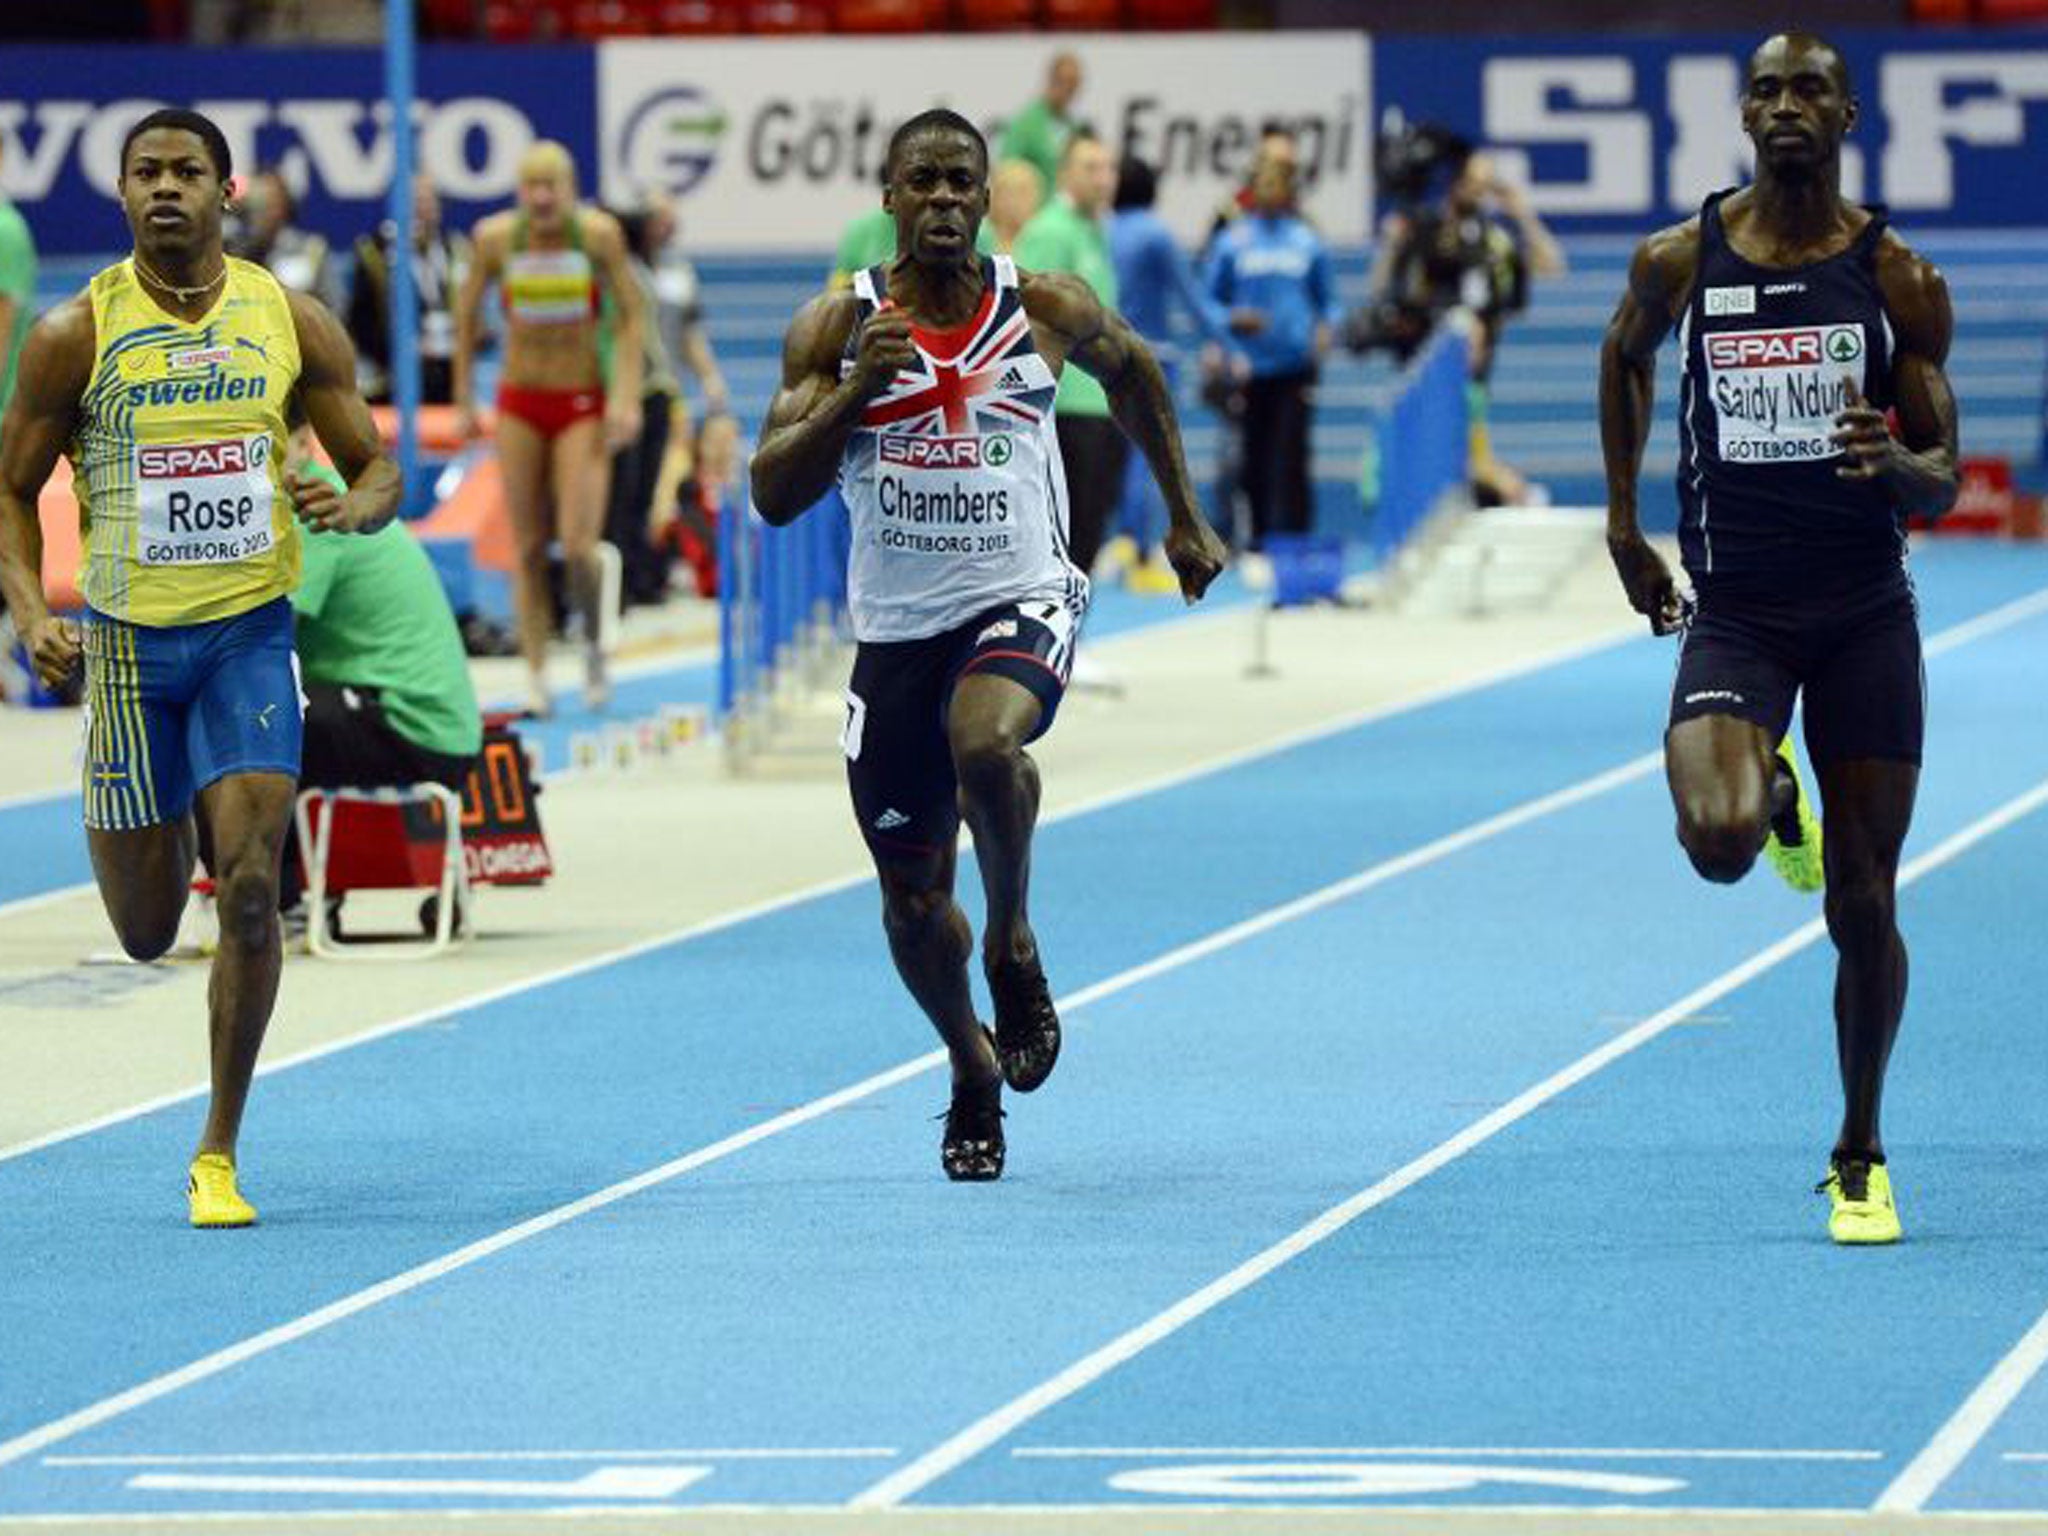 Dwain Chambers was eliminated in the first round of the 60m